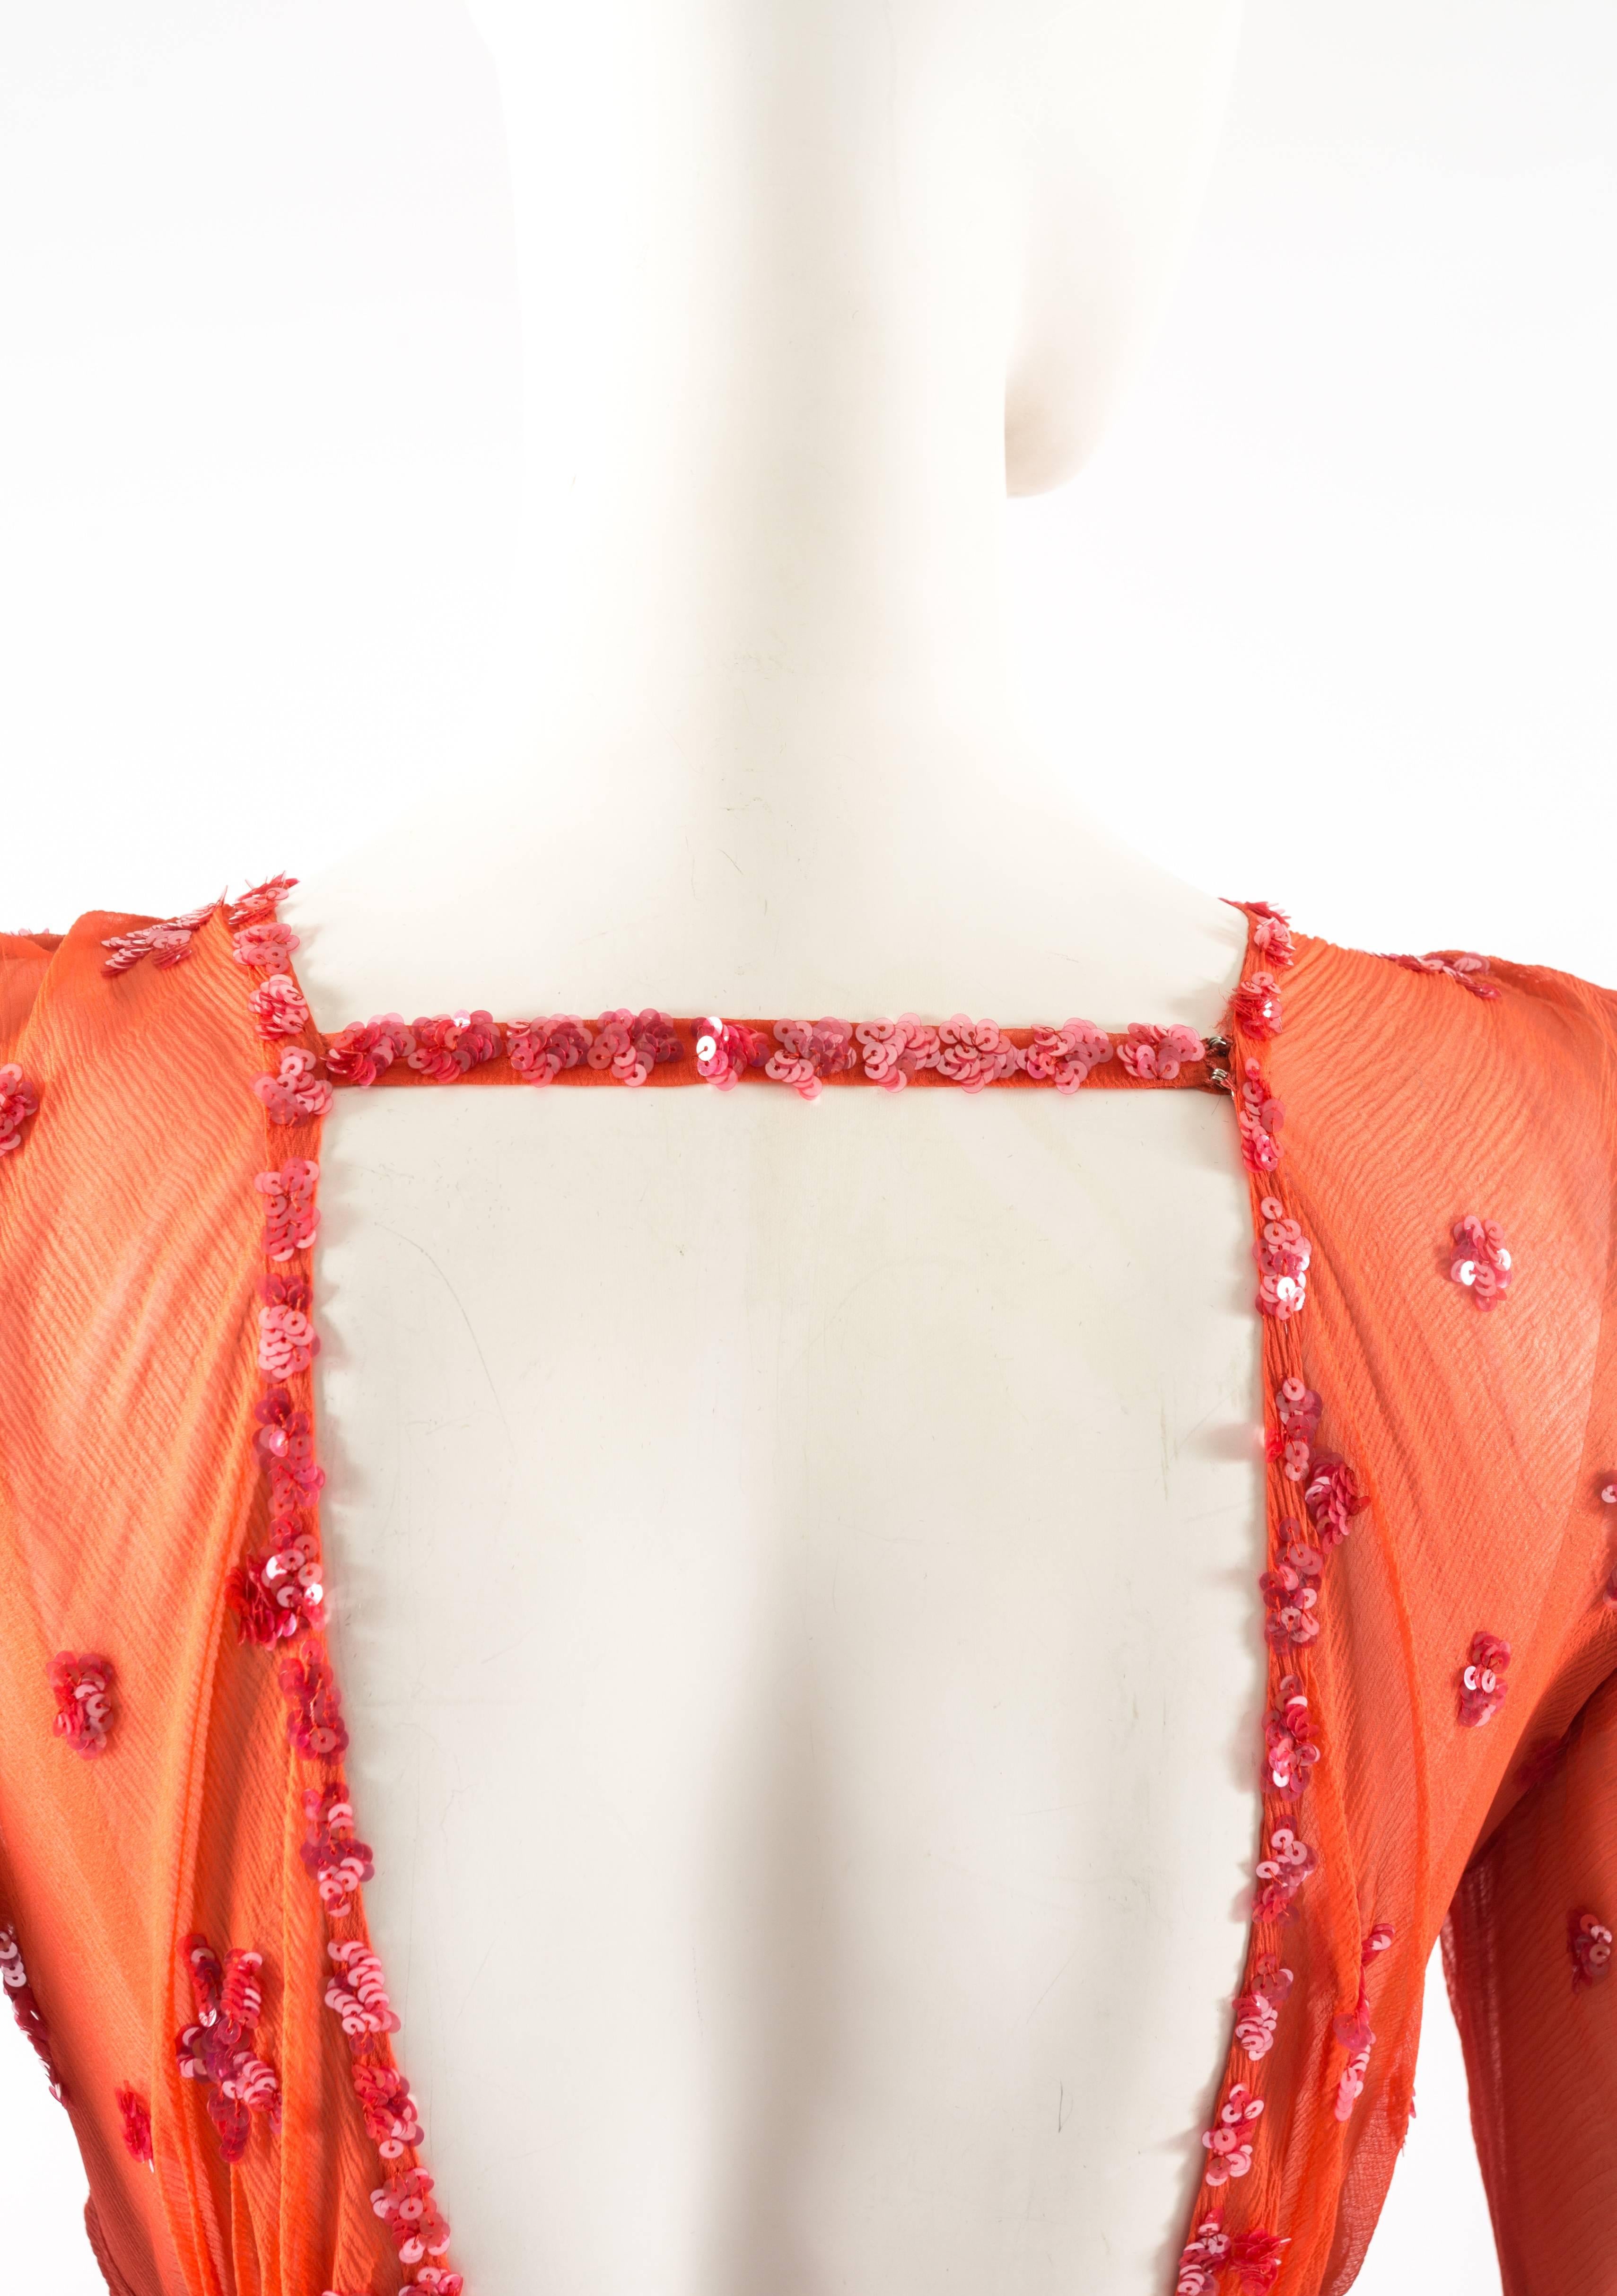 Red 1930s coral silk chiffon evening dress with sequinned star embellishment